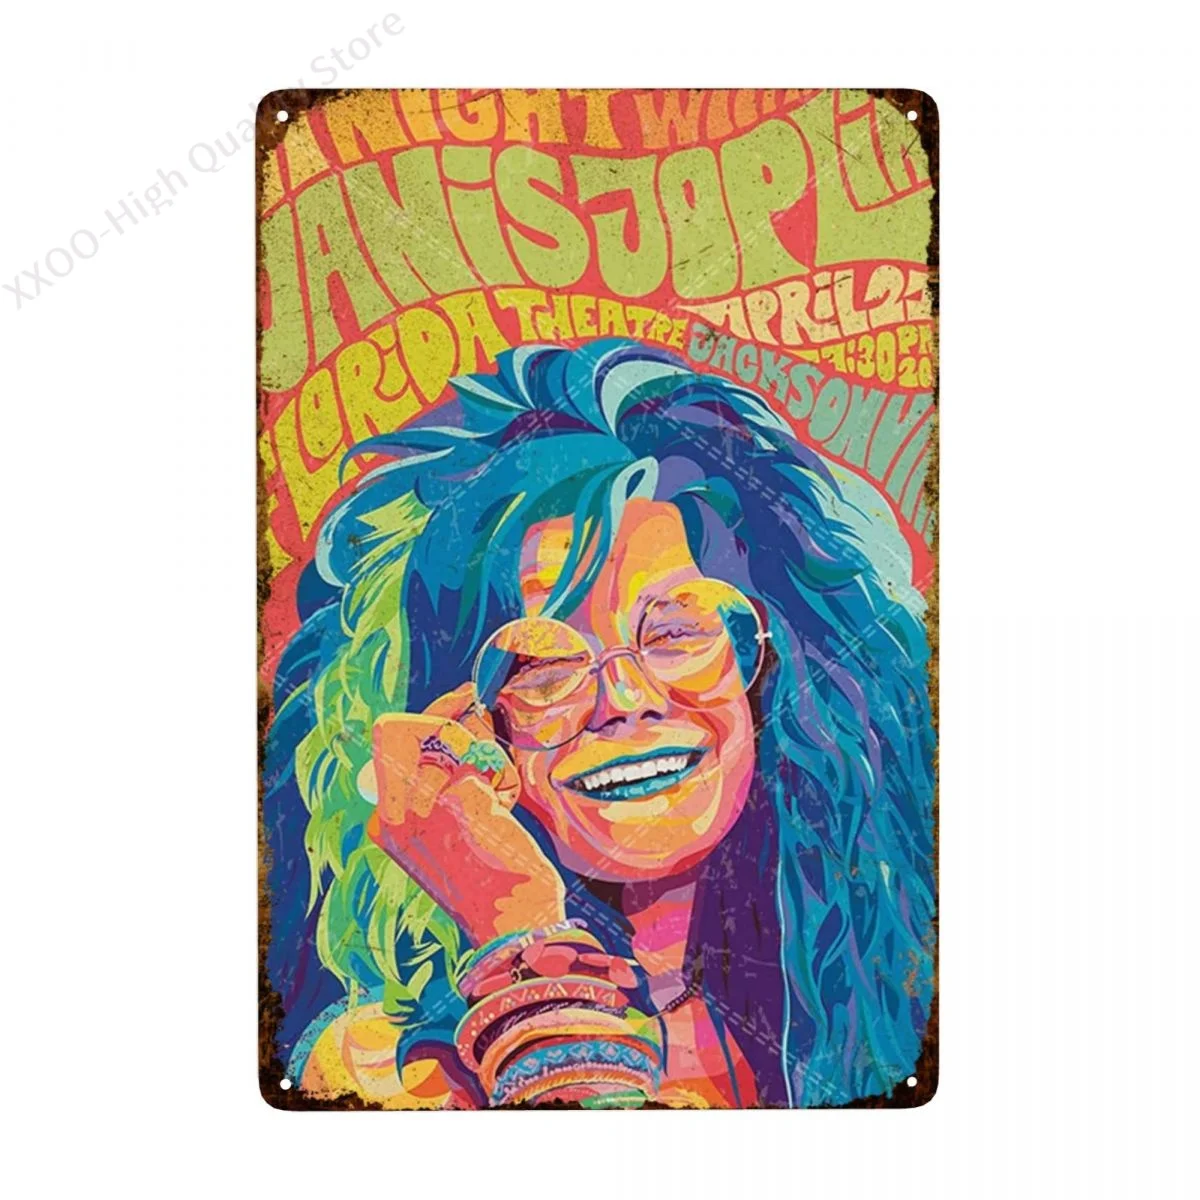 

Vintage Tin Sign - Janis Joplin - Retro Metal Signs Poster Iron Painting Plaque Wall Decor for Bar Cafe Home Garage20x30cm